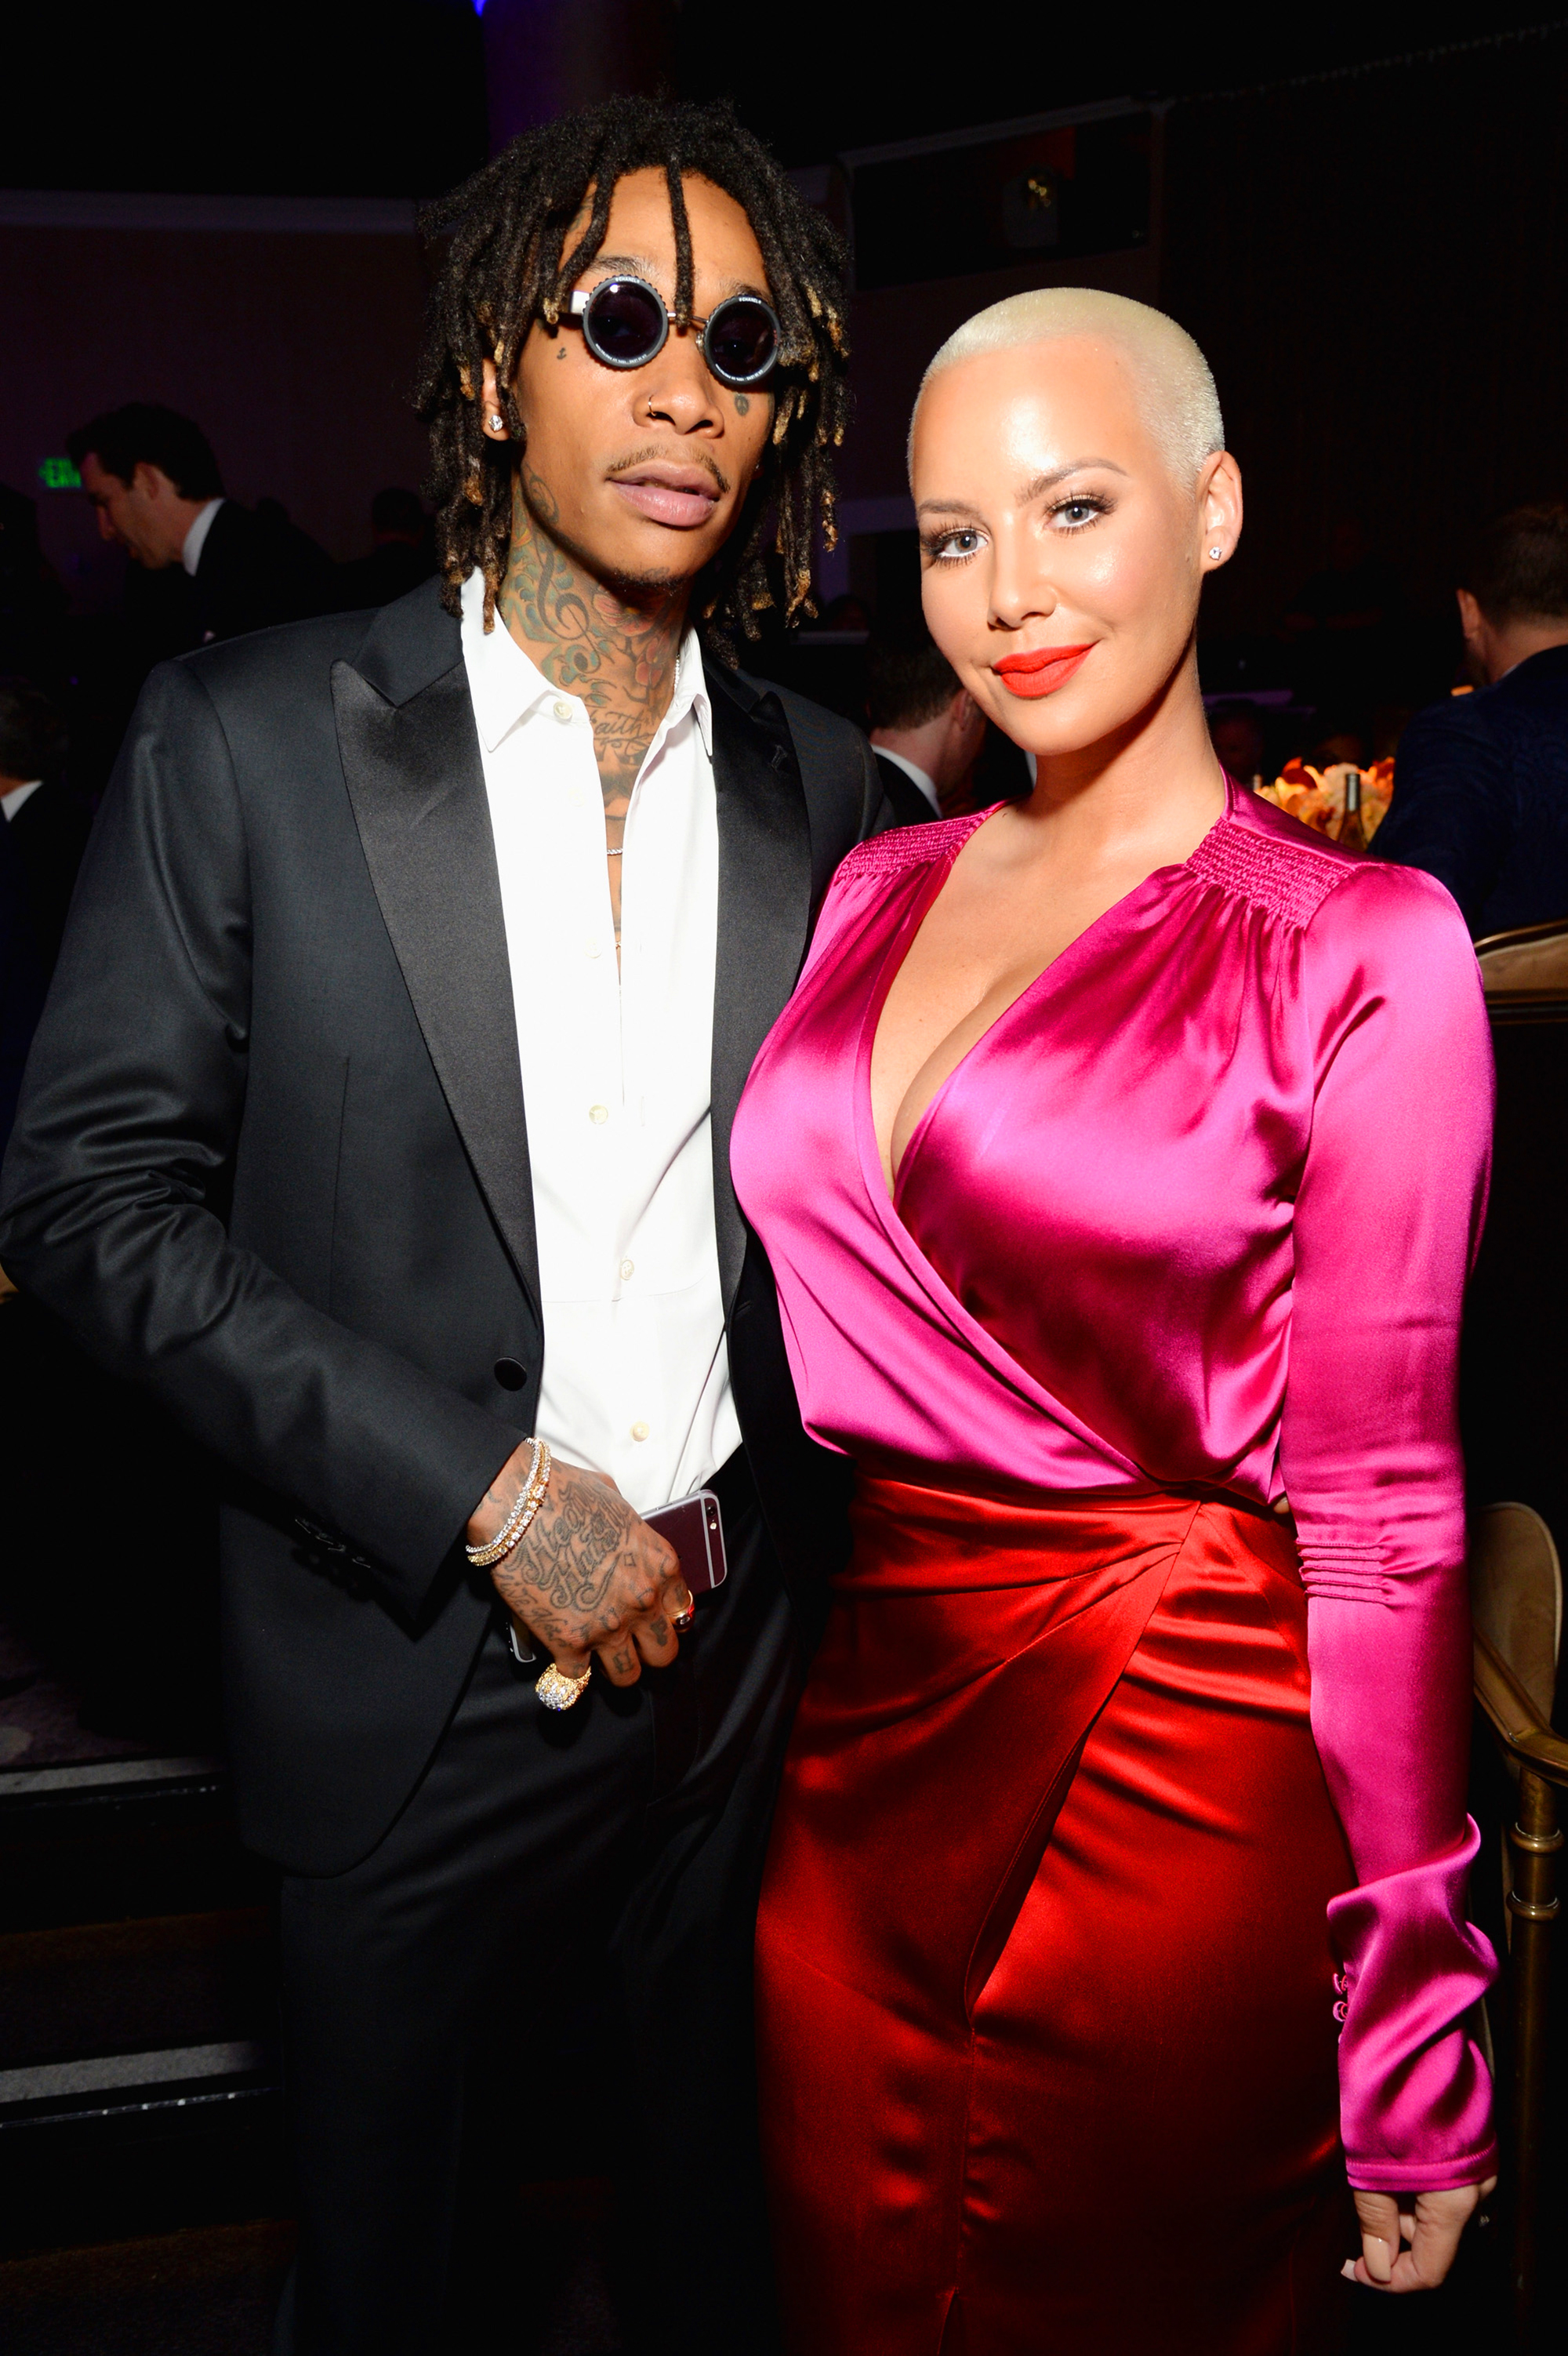 Amber Rose: The Key to Coparenting With Wiz Khalifa Involves Sex